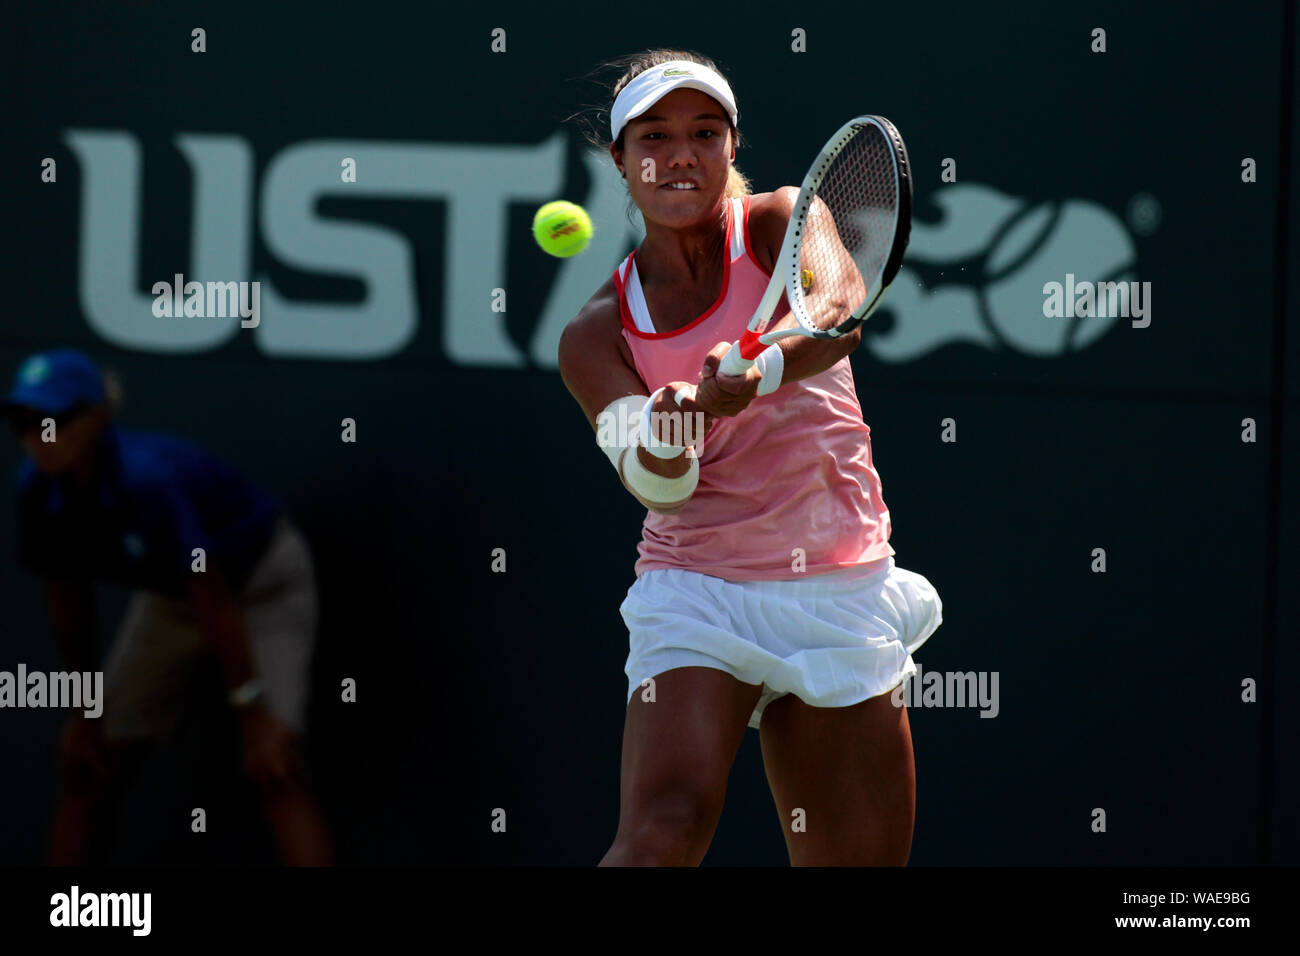 New York, United States. 19th Aug, 2019. Kristie Anh of the United States during her match against Jil Teichmann of Switzerland at the NYJTL Bronx Open at the Cary Leeds Tennis Center, in Crotona Park in New York's Bronx. The tournament which is free to the public is the first professional tournament in the Bronx since 2012. Credit: Adam Stoltman/Alamy Live News Stock Photo